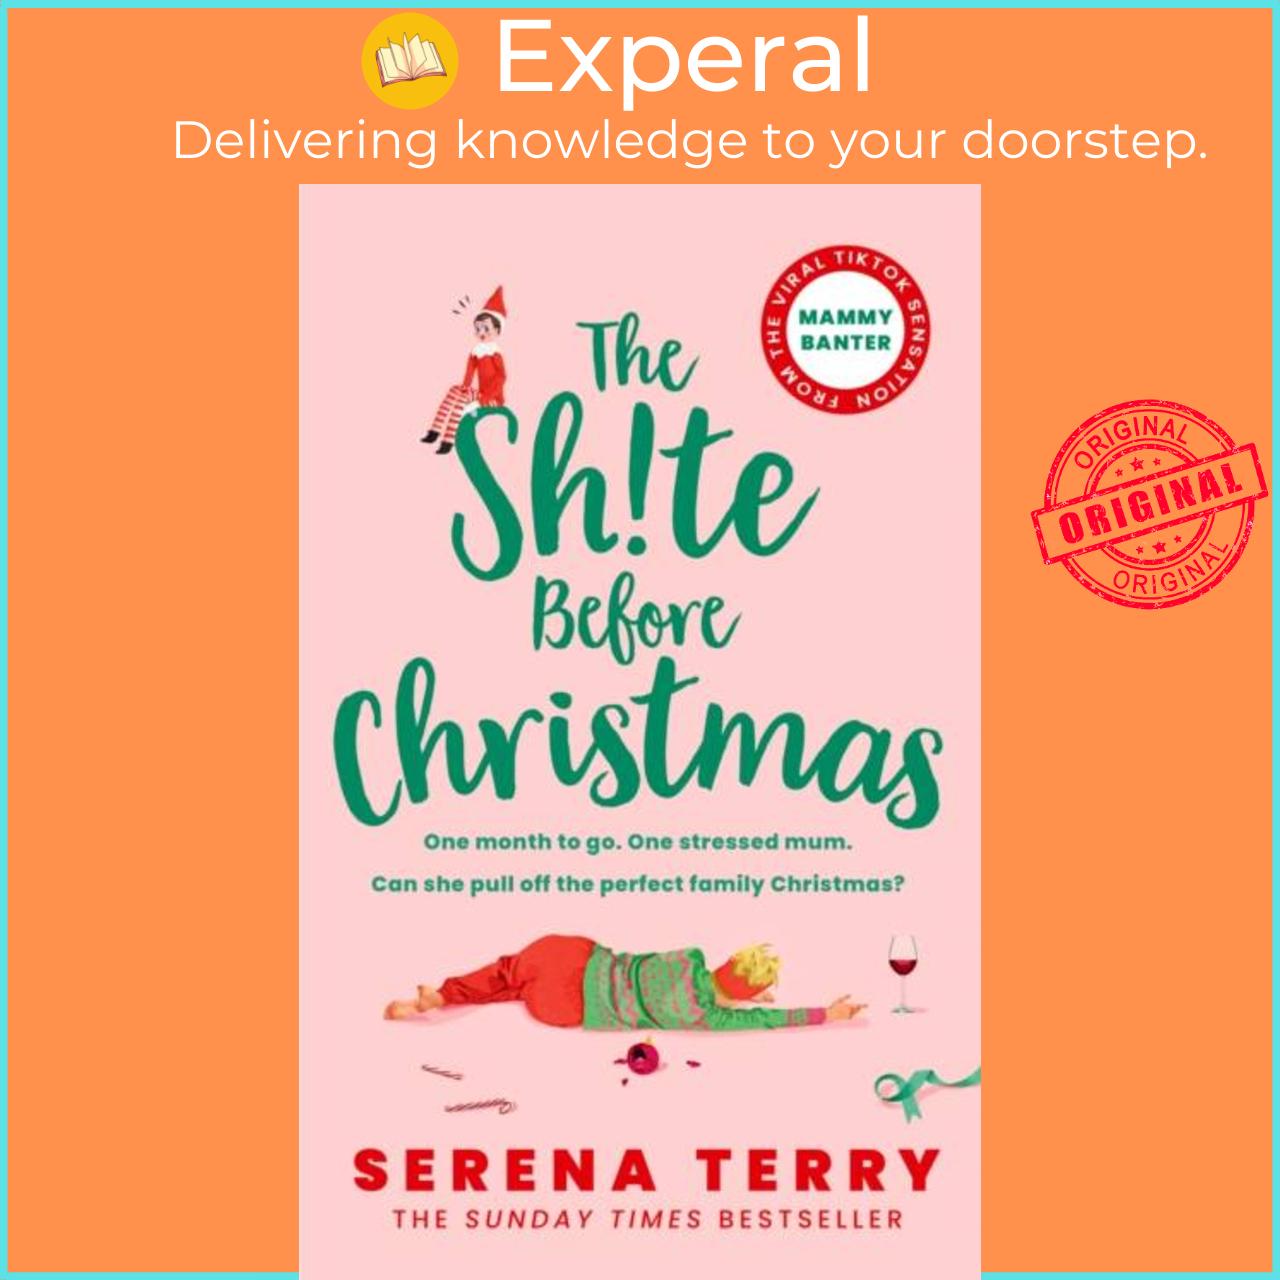 Sách - The Sh!te Before Christmas by Serena Terry (UK edition, paperback)